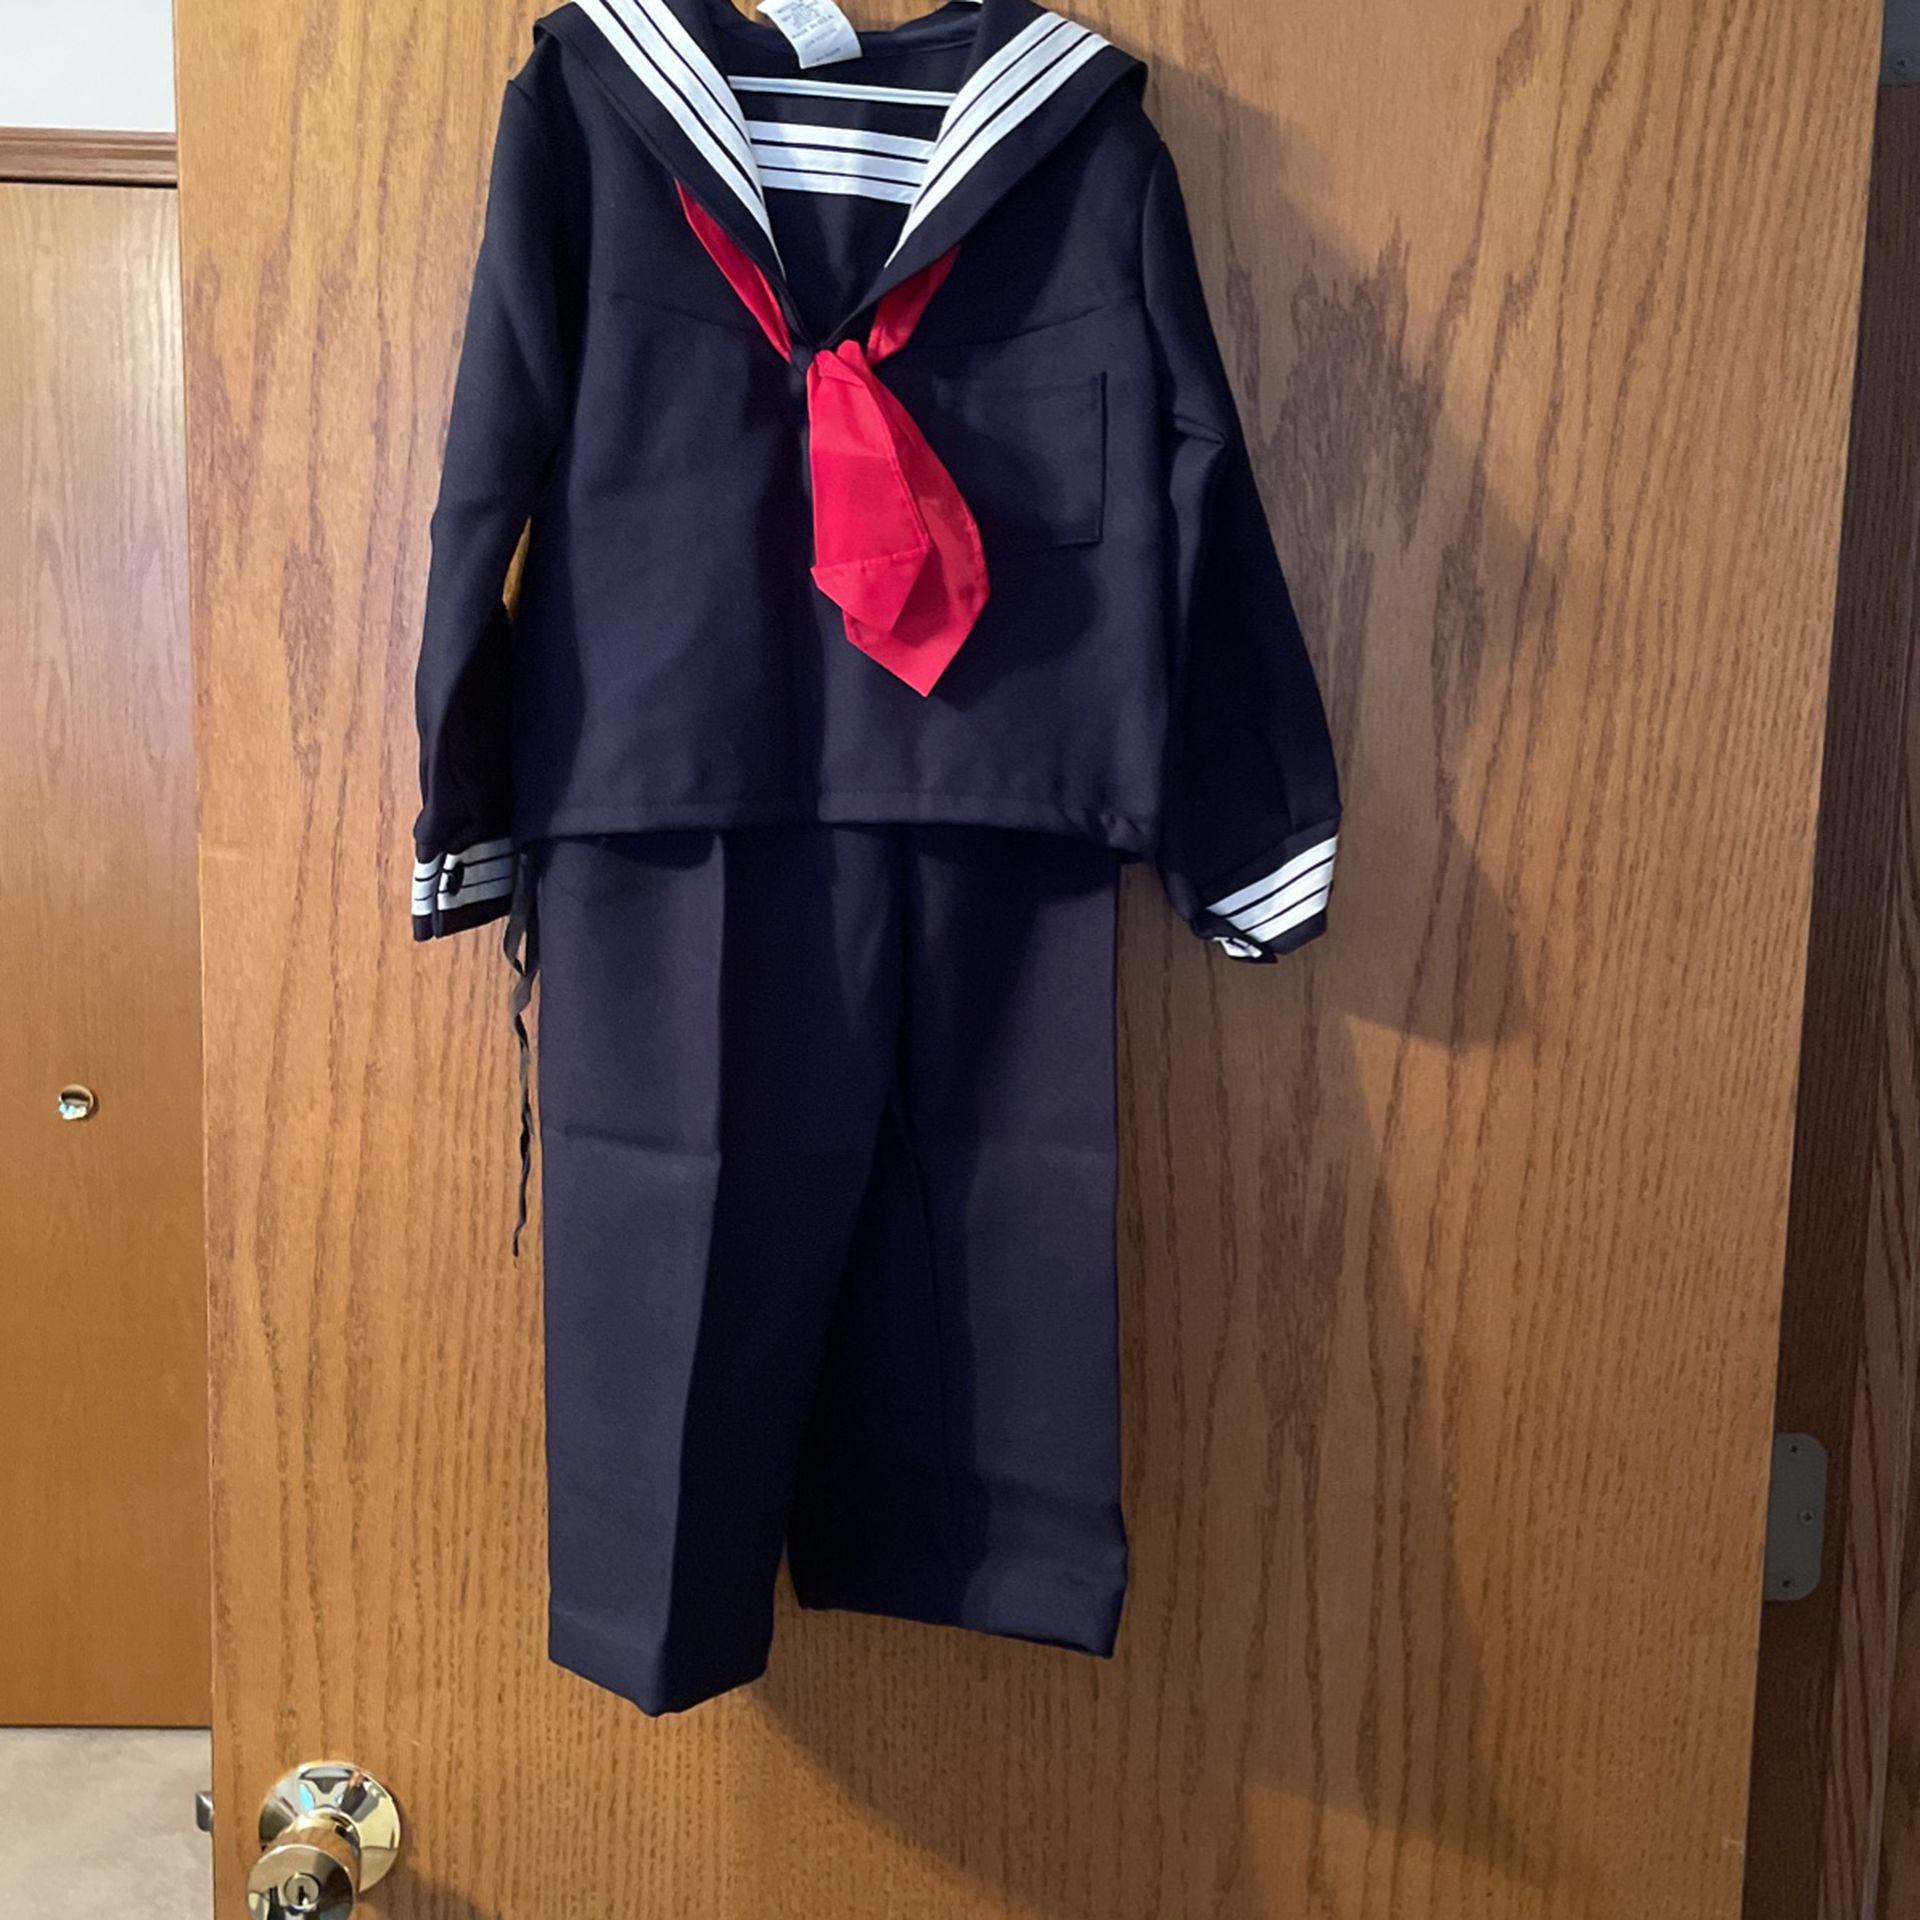 Halloween Costume - Sailor Outfit